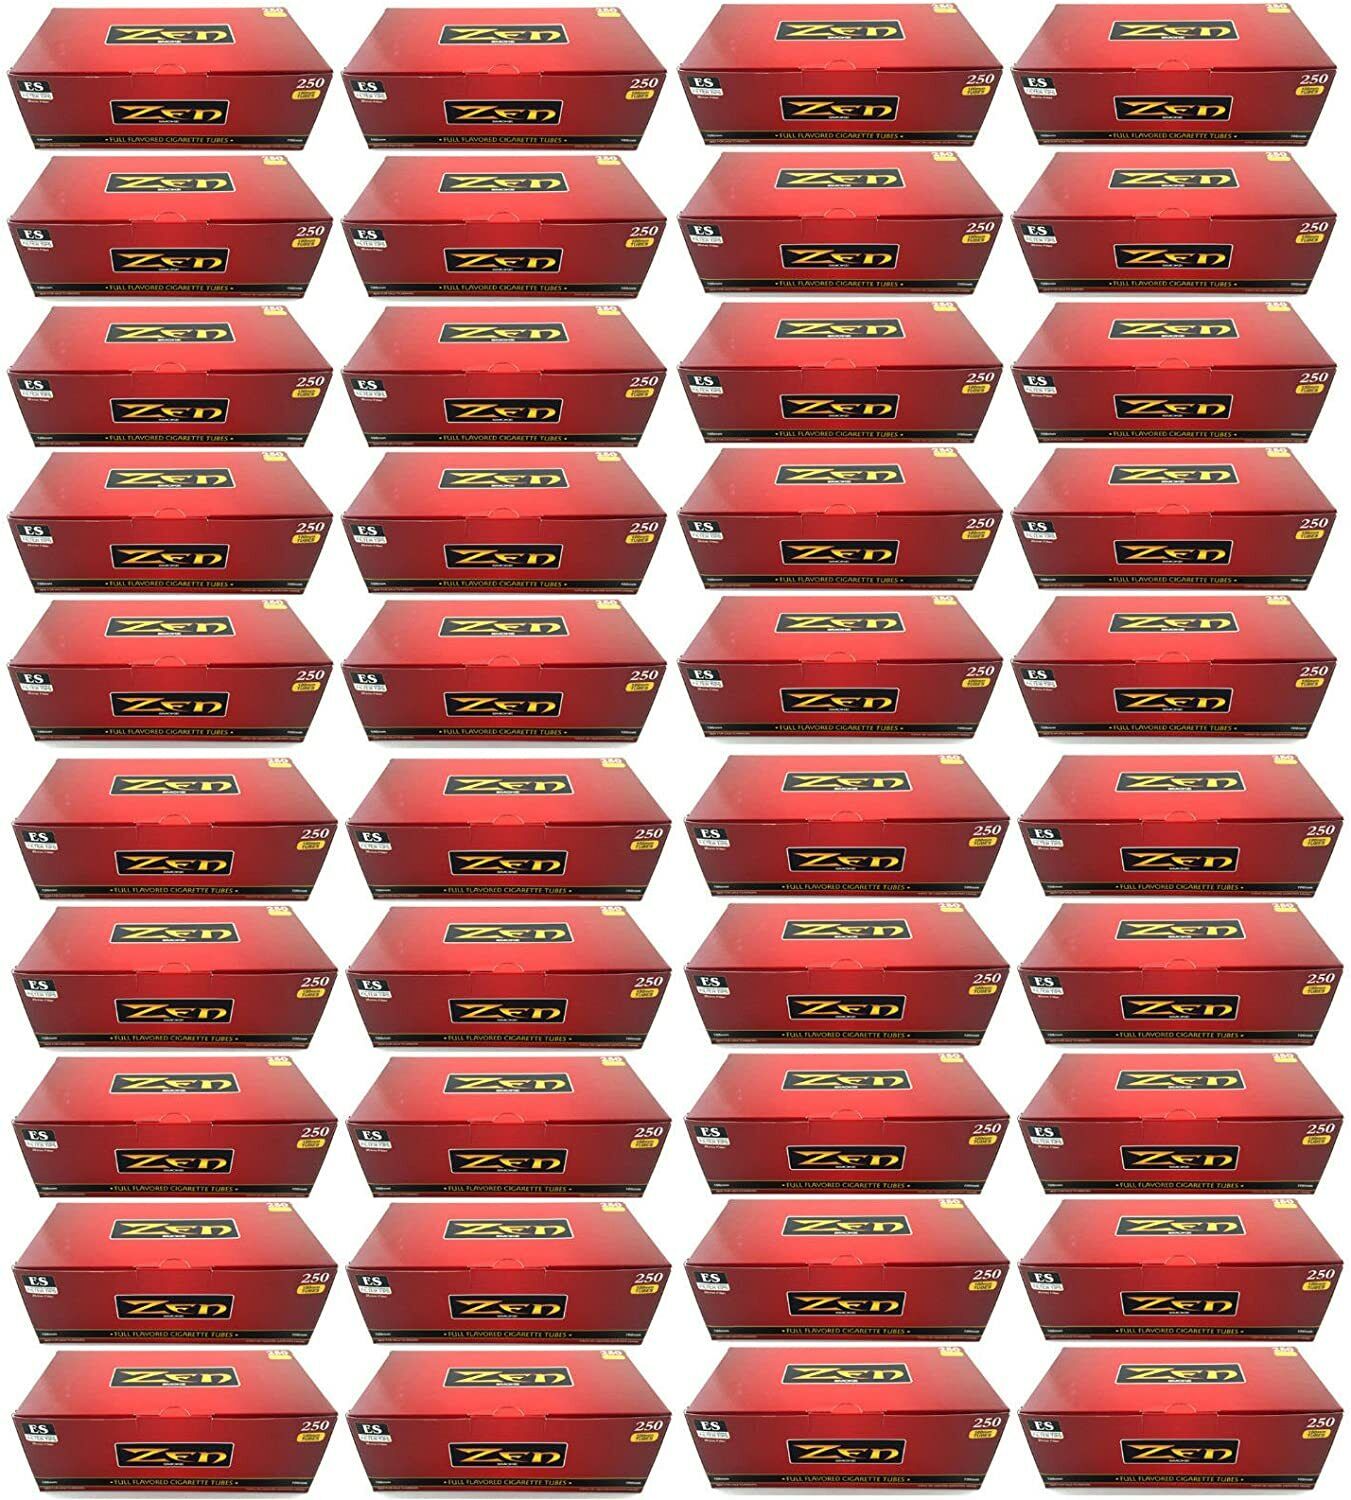 Zen Red/Full Flavor 100mm Tubes 250ct box [40-Boxes]